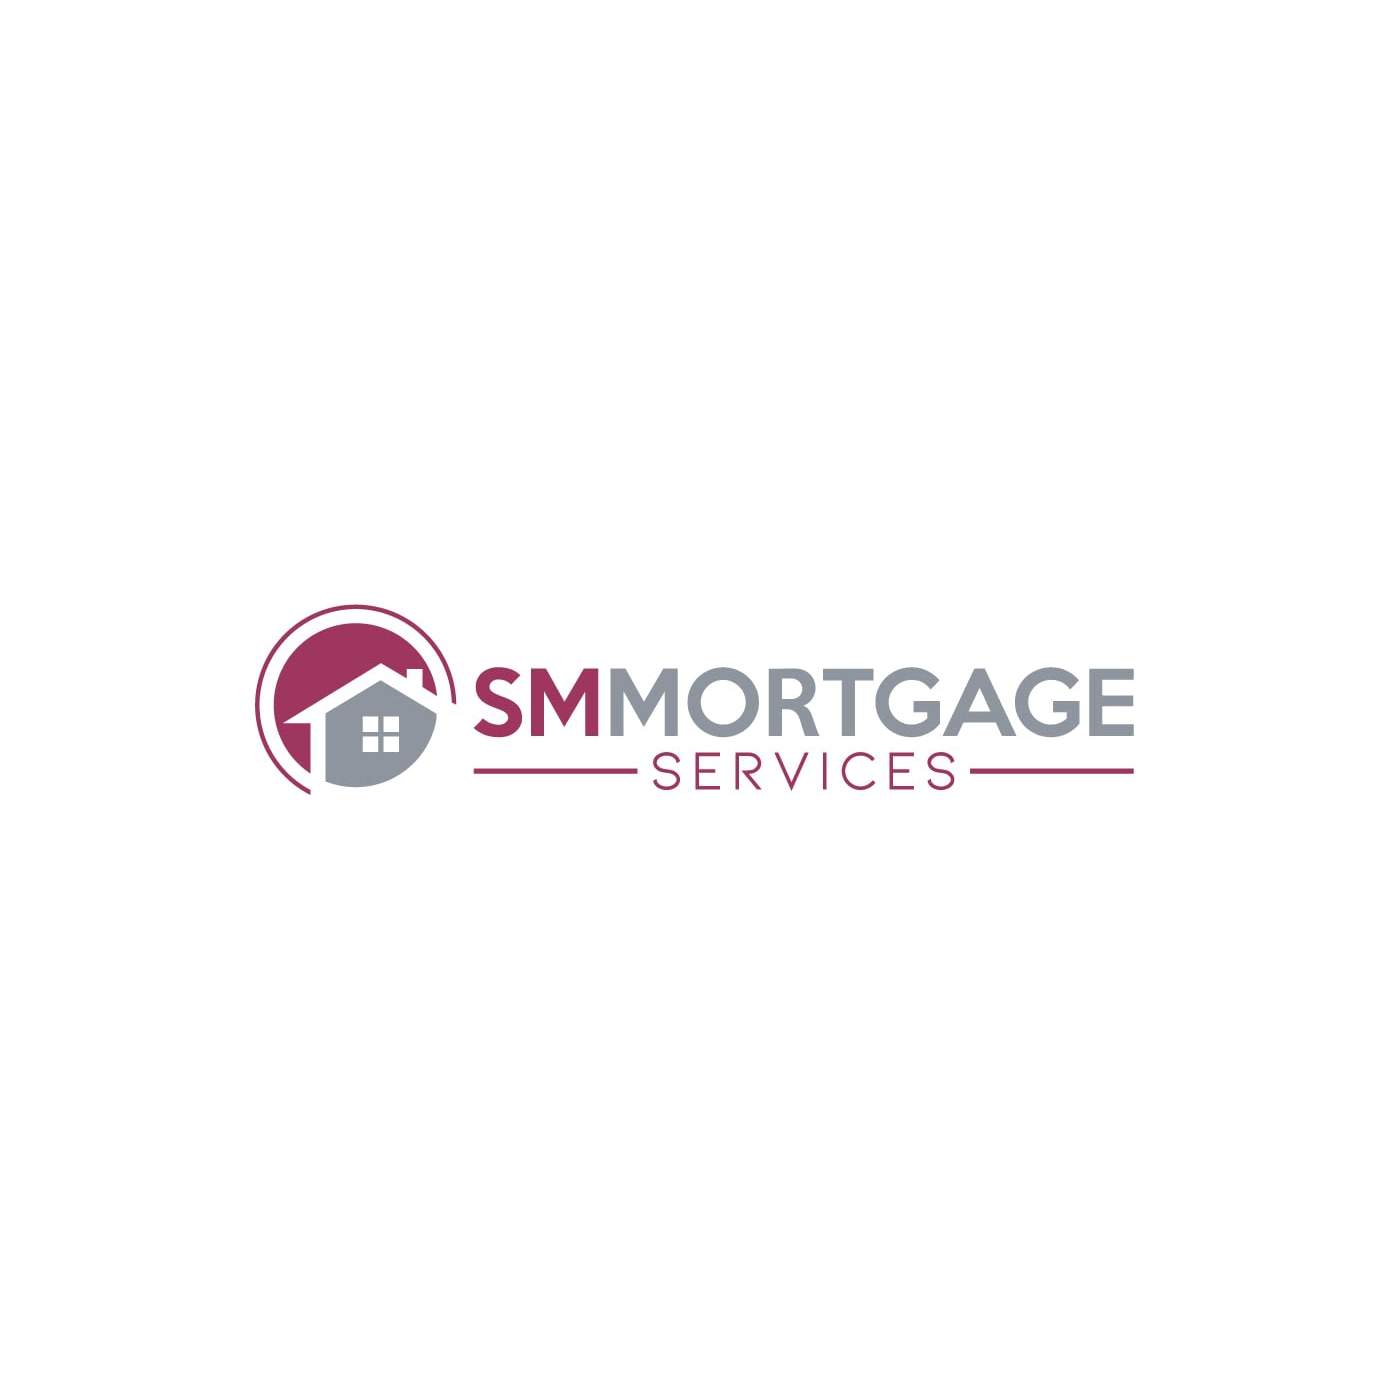 SM Mortgage Services Ltd - Brierley Hill, West Midlands DY5 3DY - 01384 465466 | ShowMeLocal.com